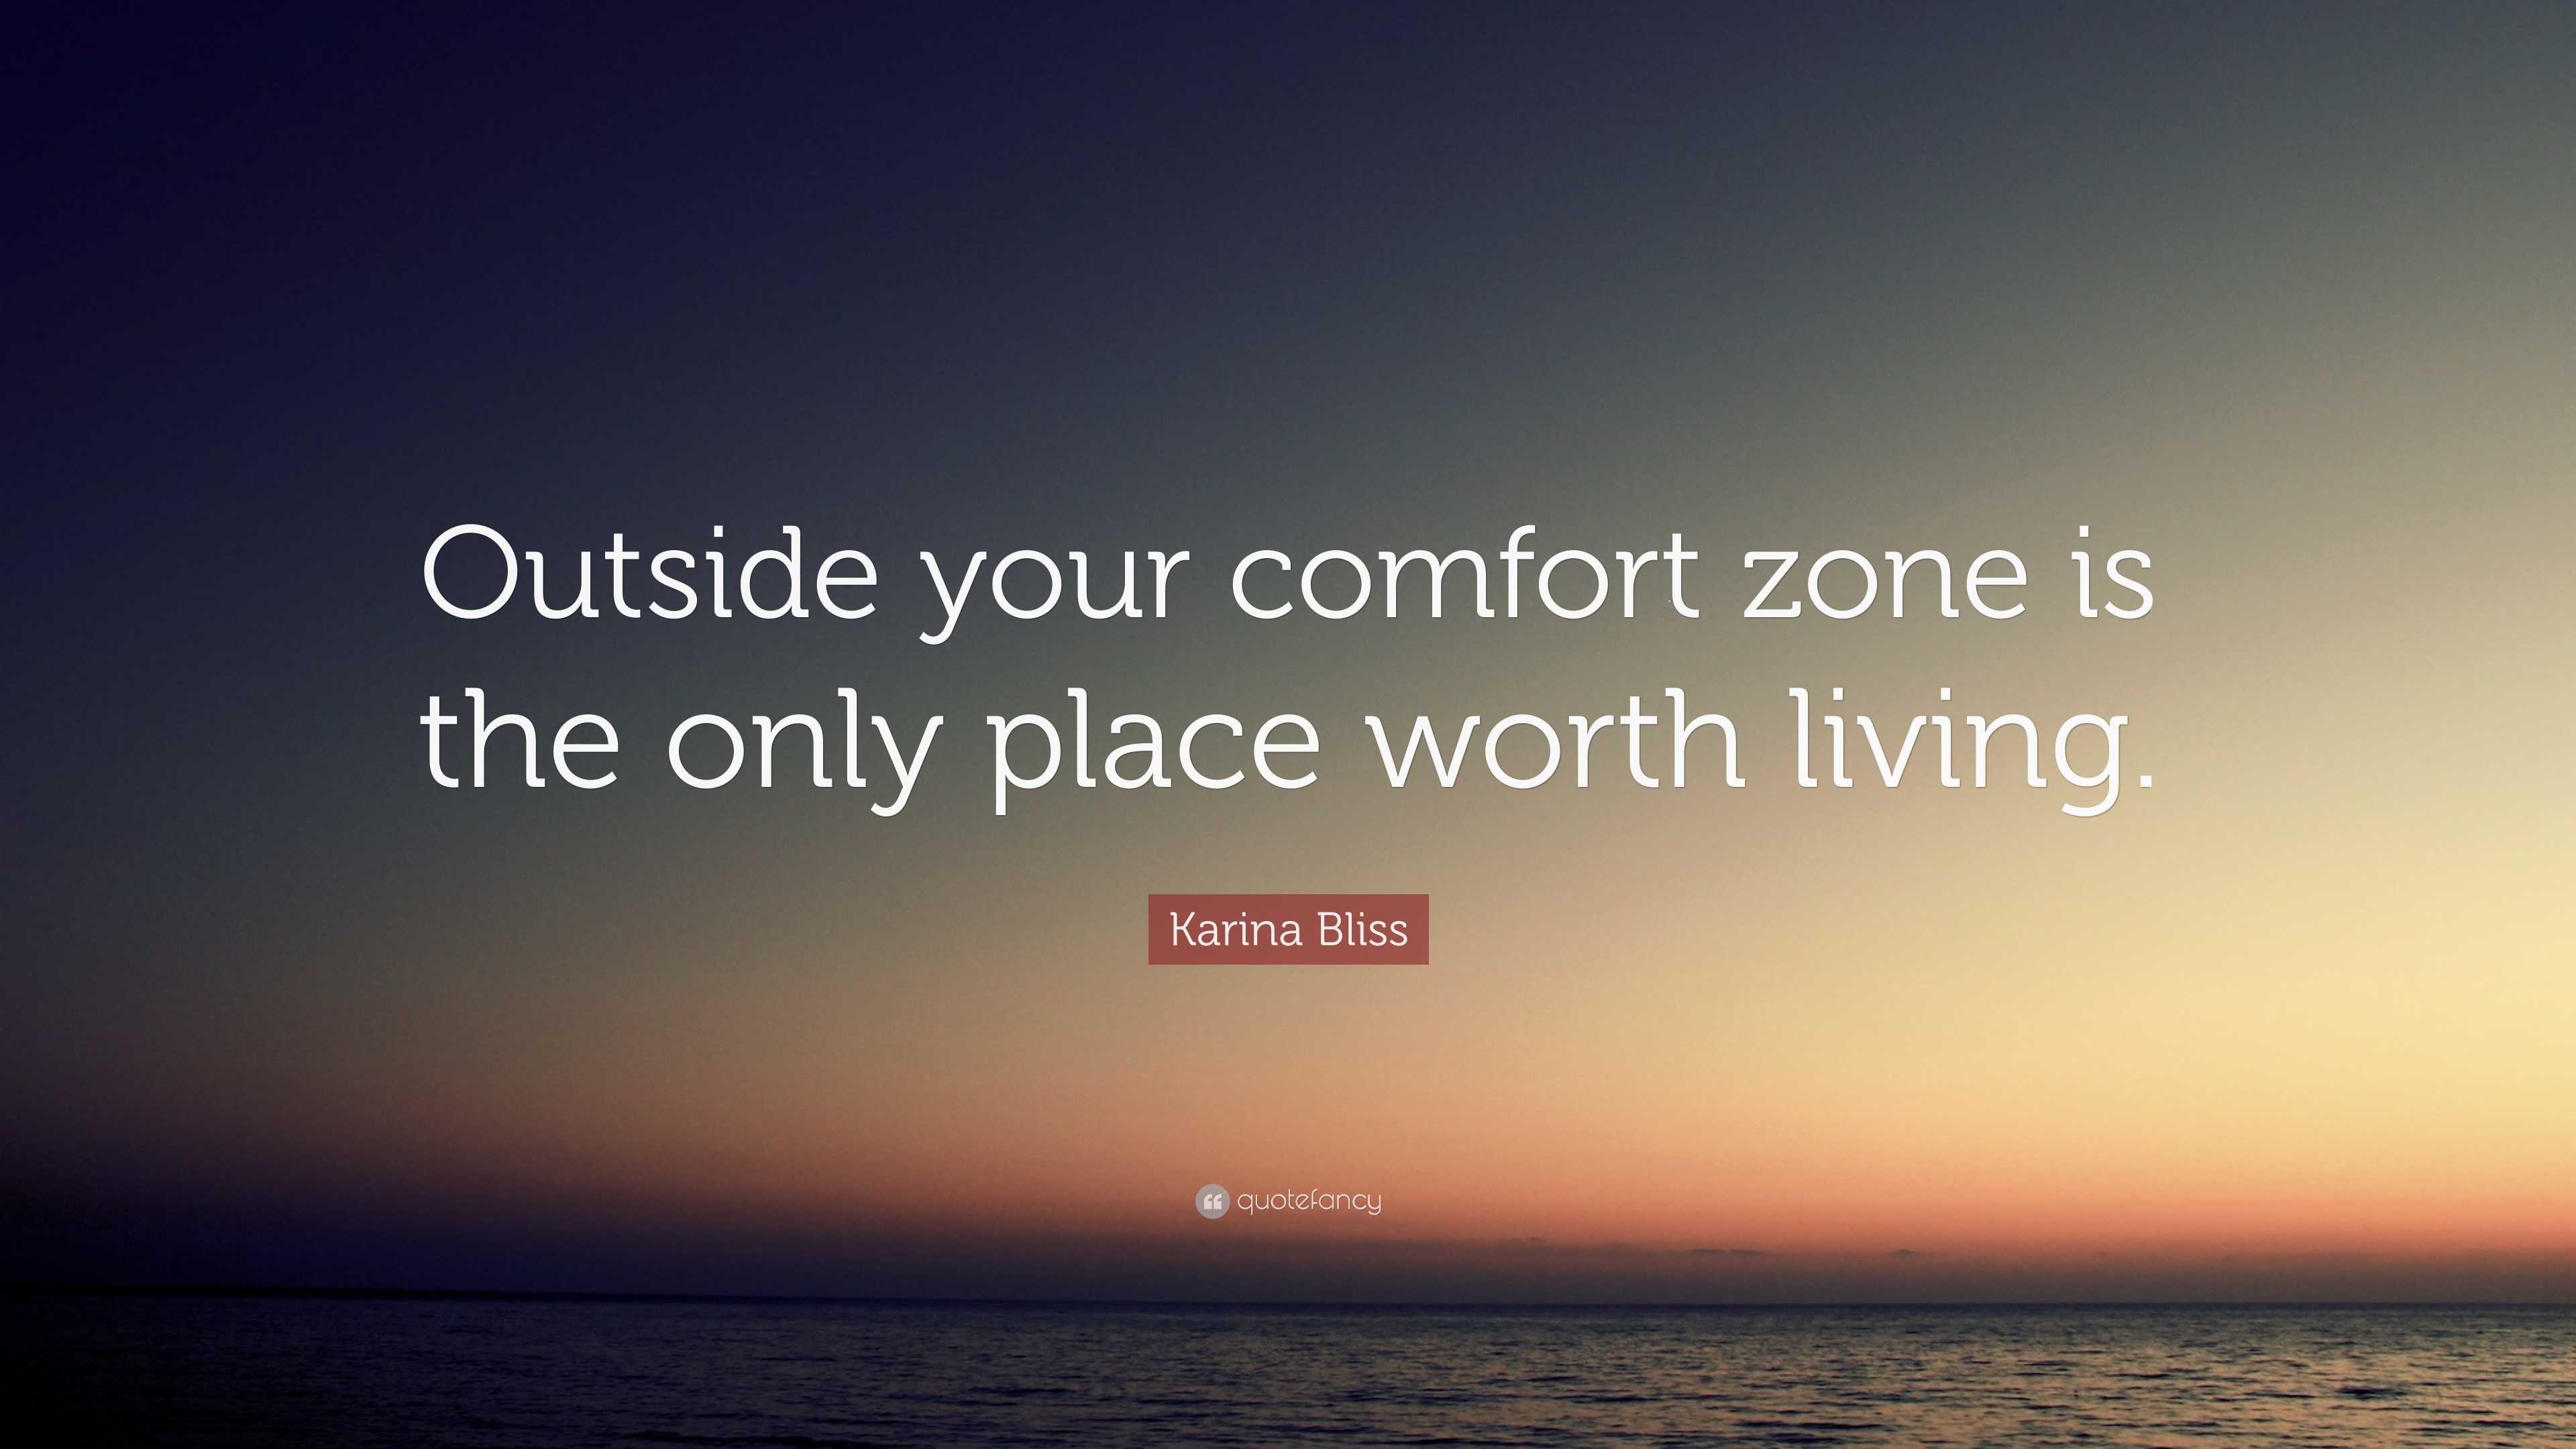 Karina Bliss Quote: “Outside your comfort zone is the only place worth  living.”